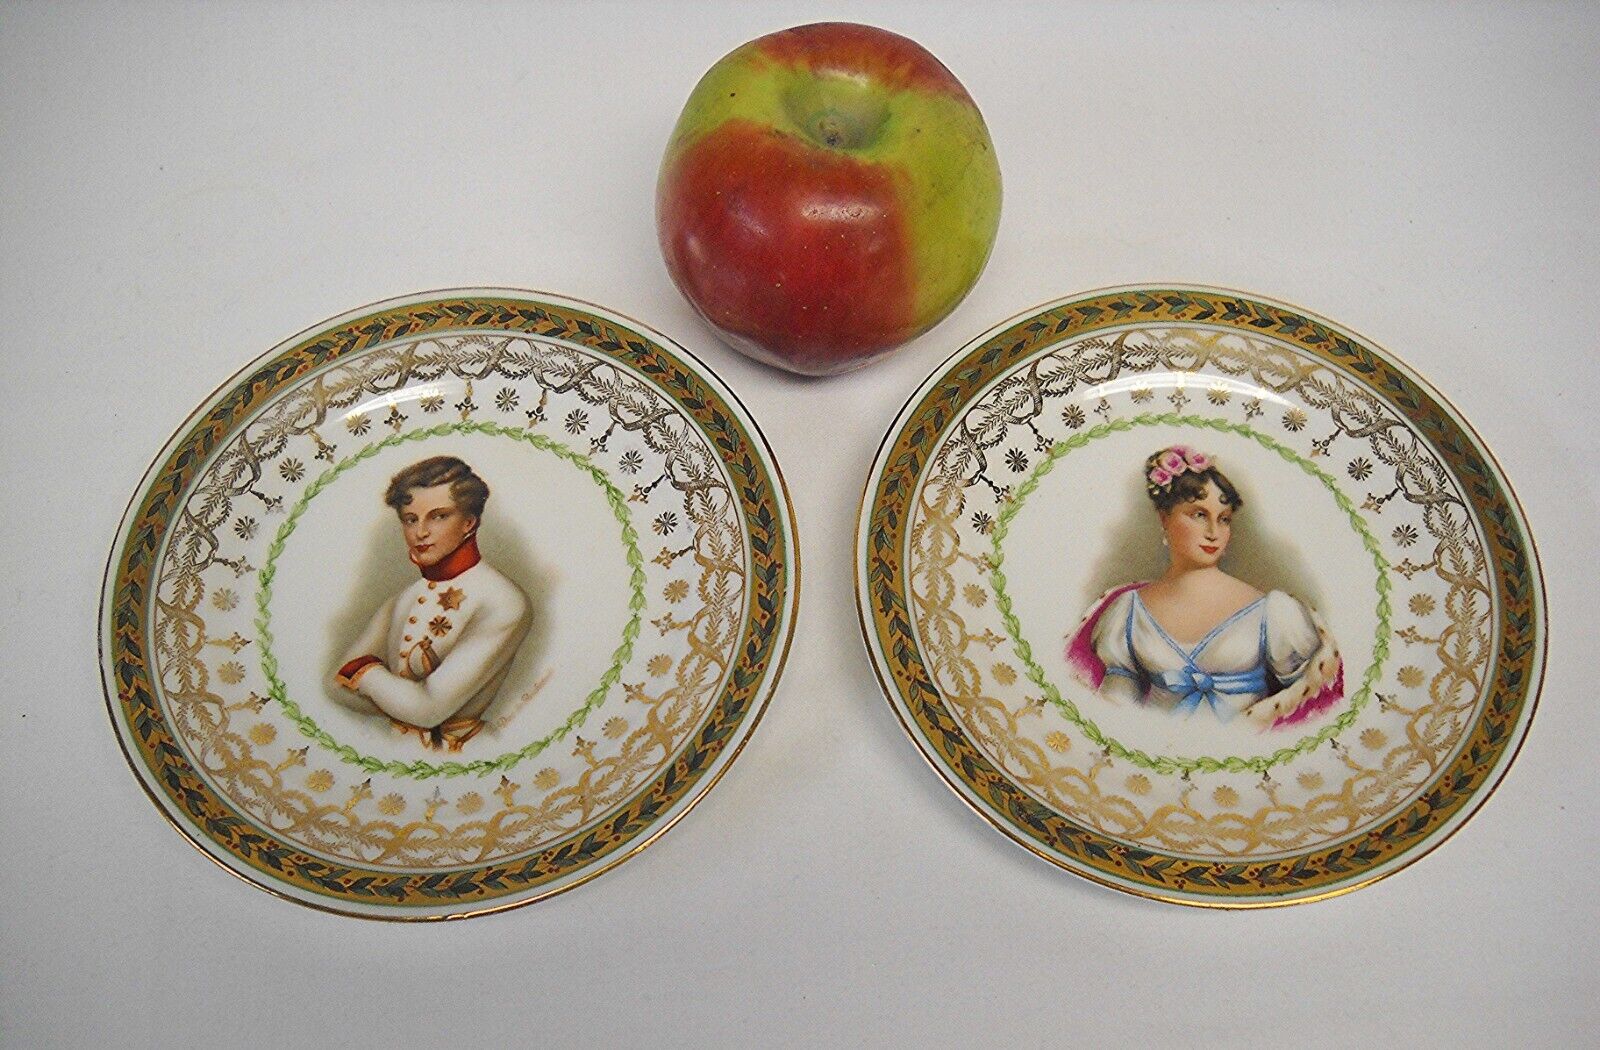 Matched Pair Porcelain NAPOLEON II & MARIE LOUISE CHINA PLATES-VG